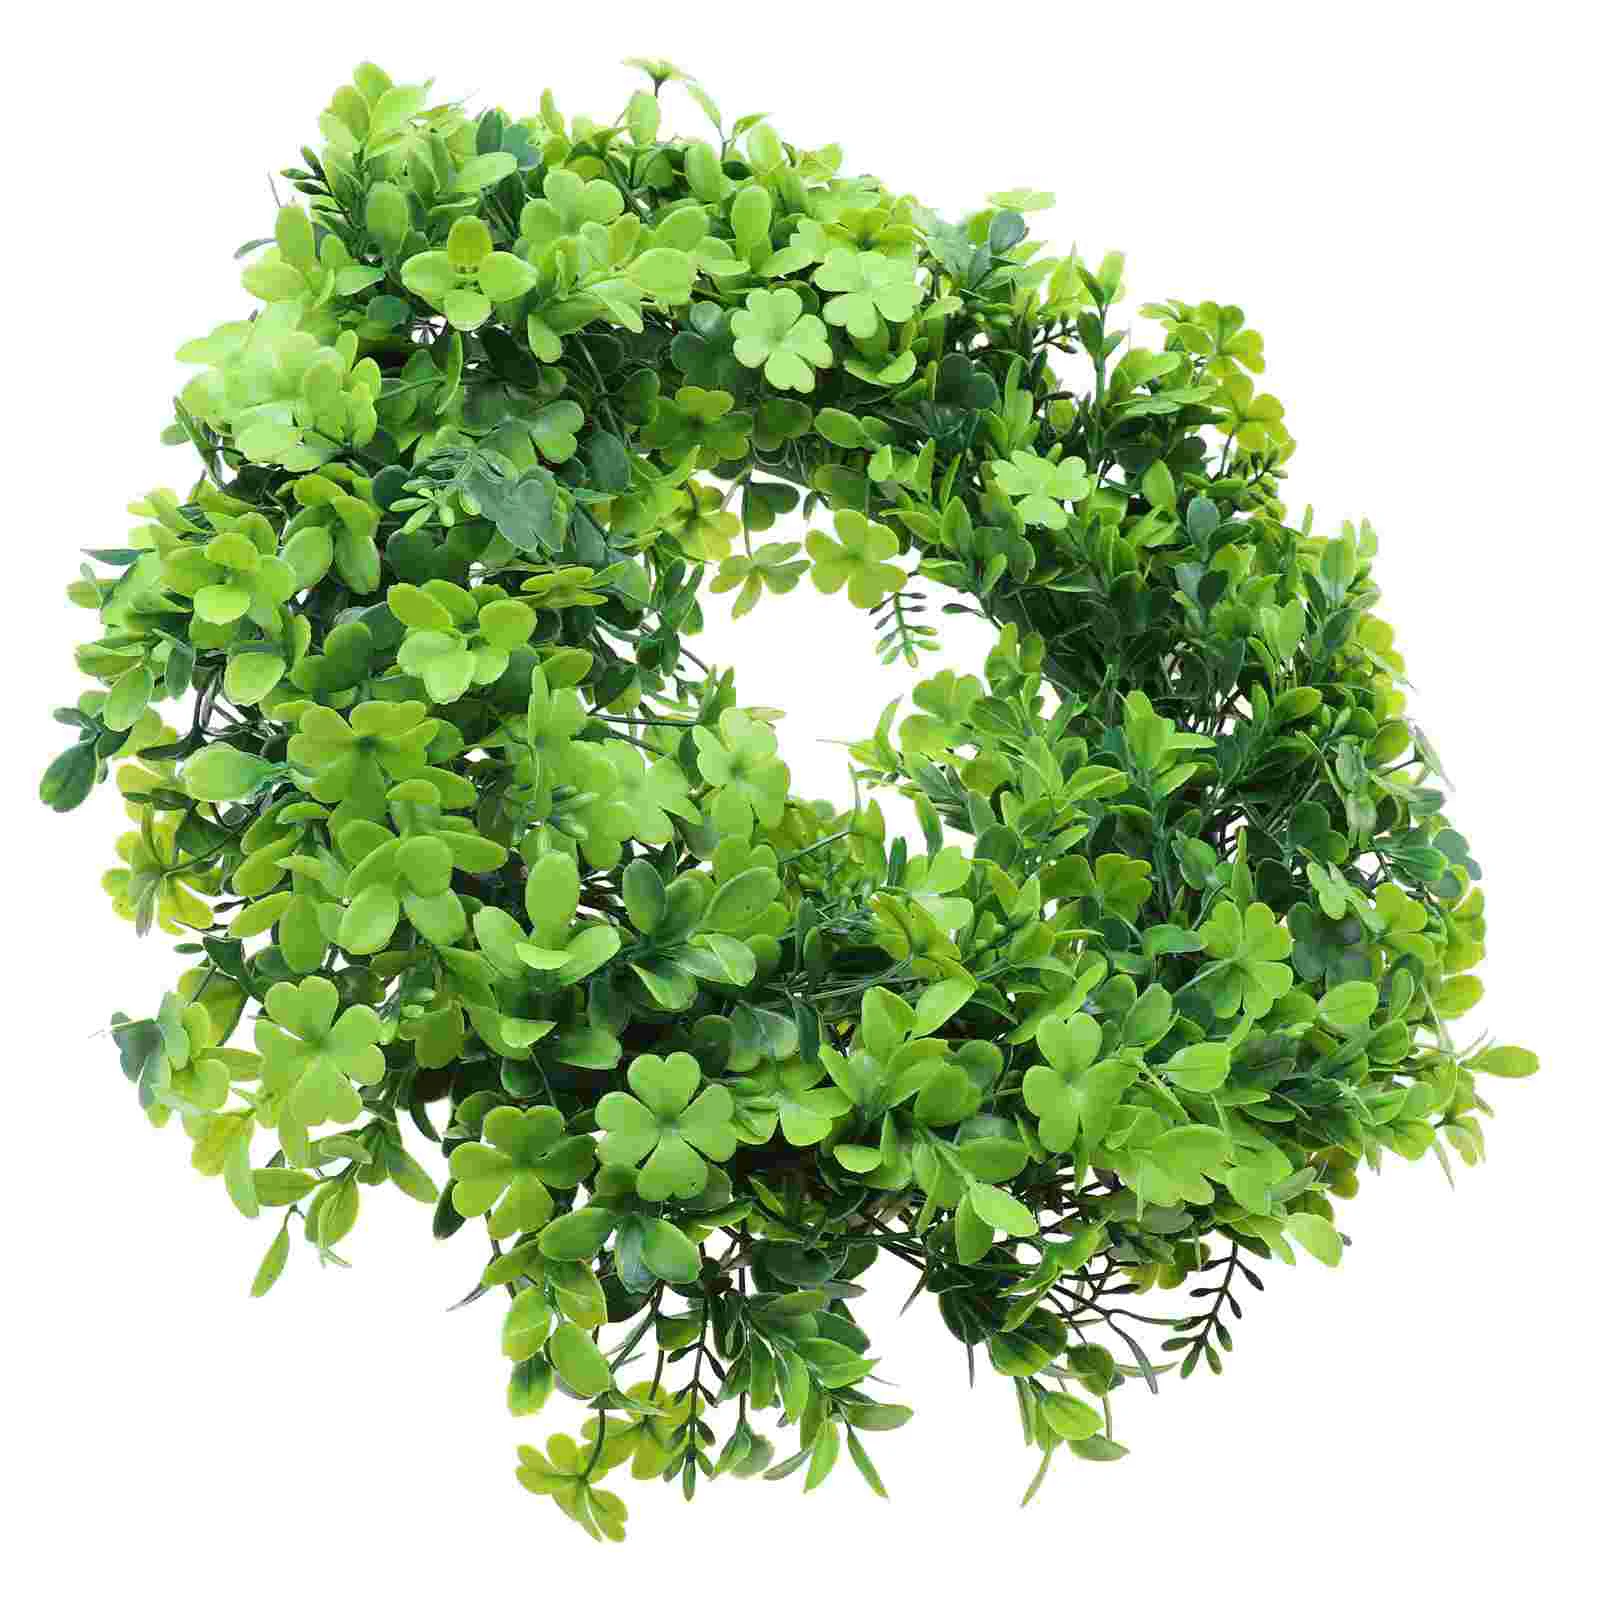 

Wreath Day Patricks St Garland Door Wreaths Decor Green Front Decorations Patrick S Hanging Party Felt Simulated Scene Gift